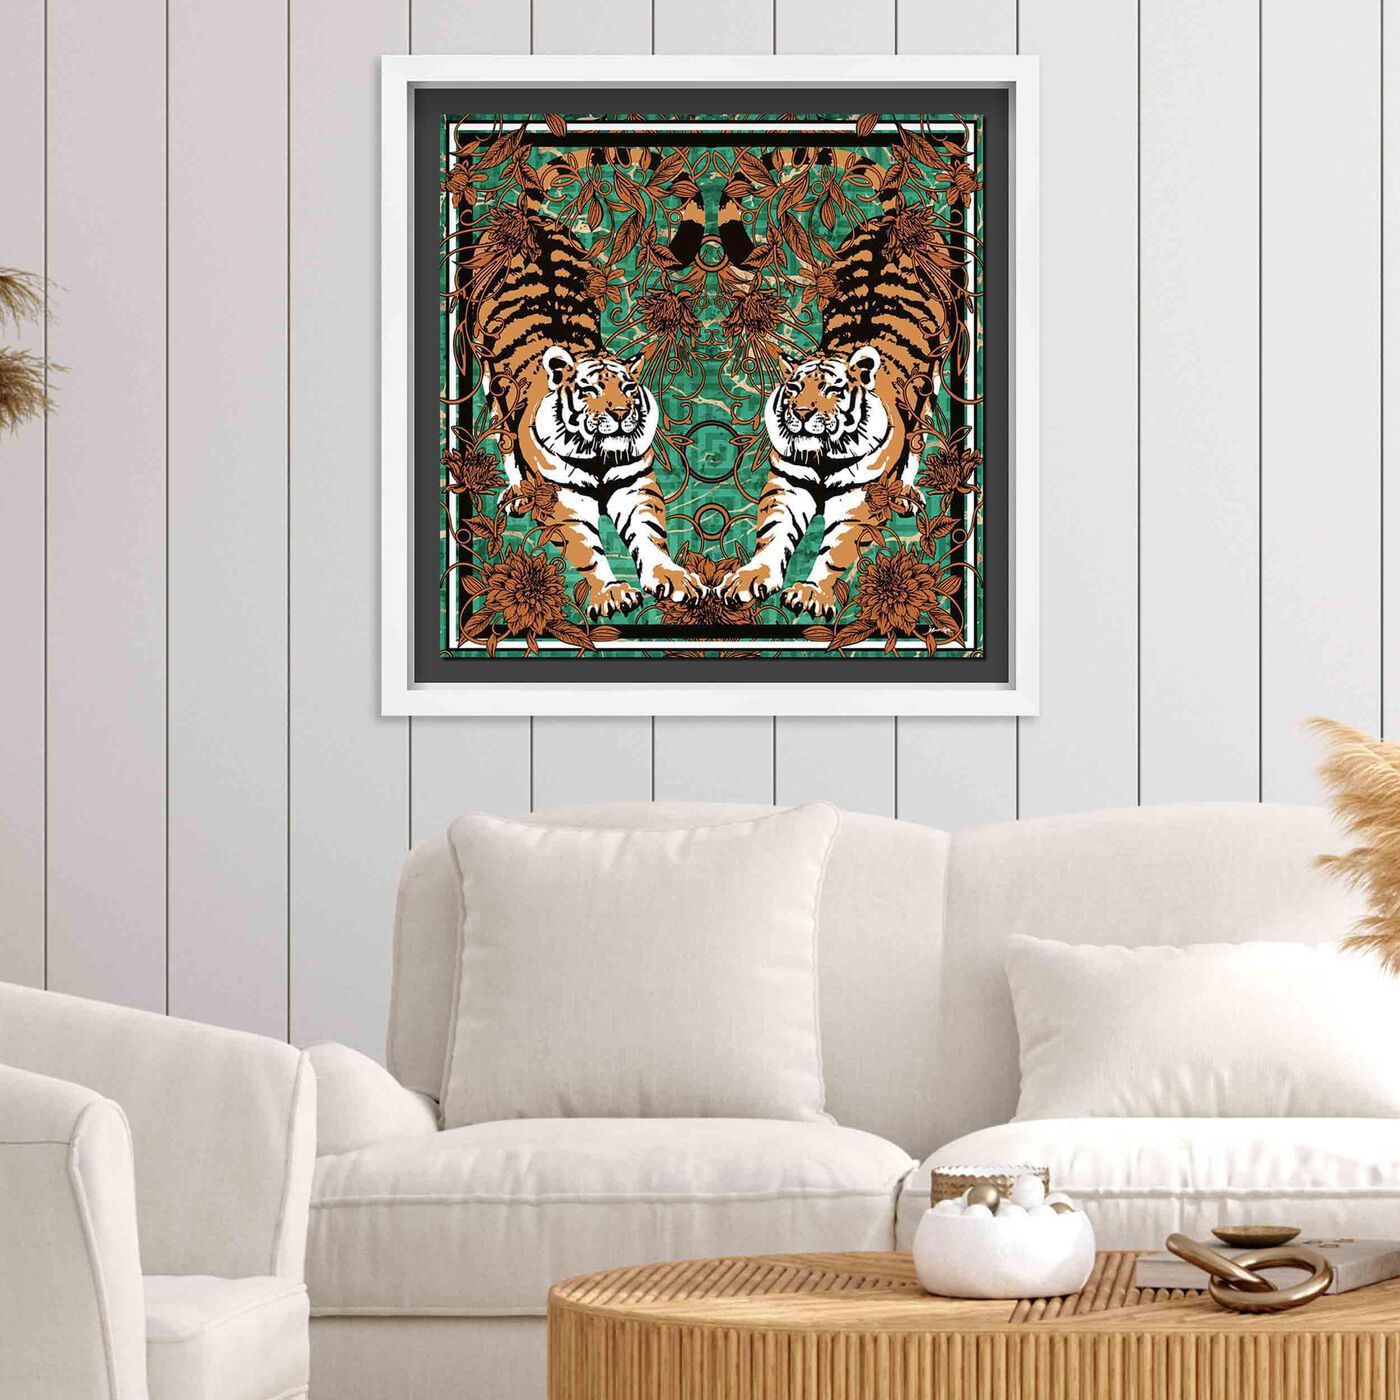 Emerald Tiger Pair - Displayed in a Shadowbox